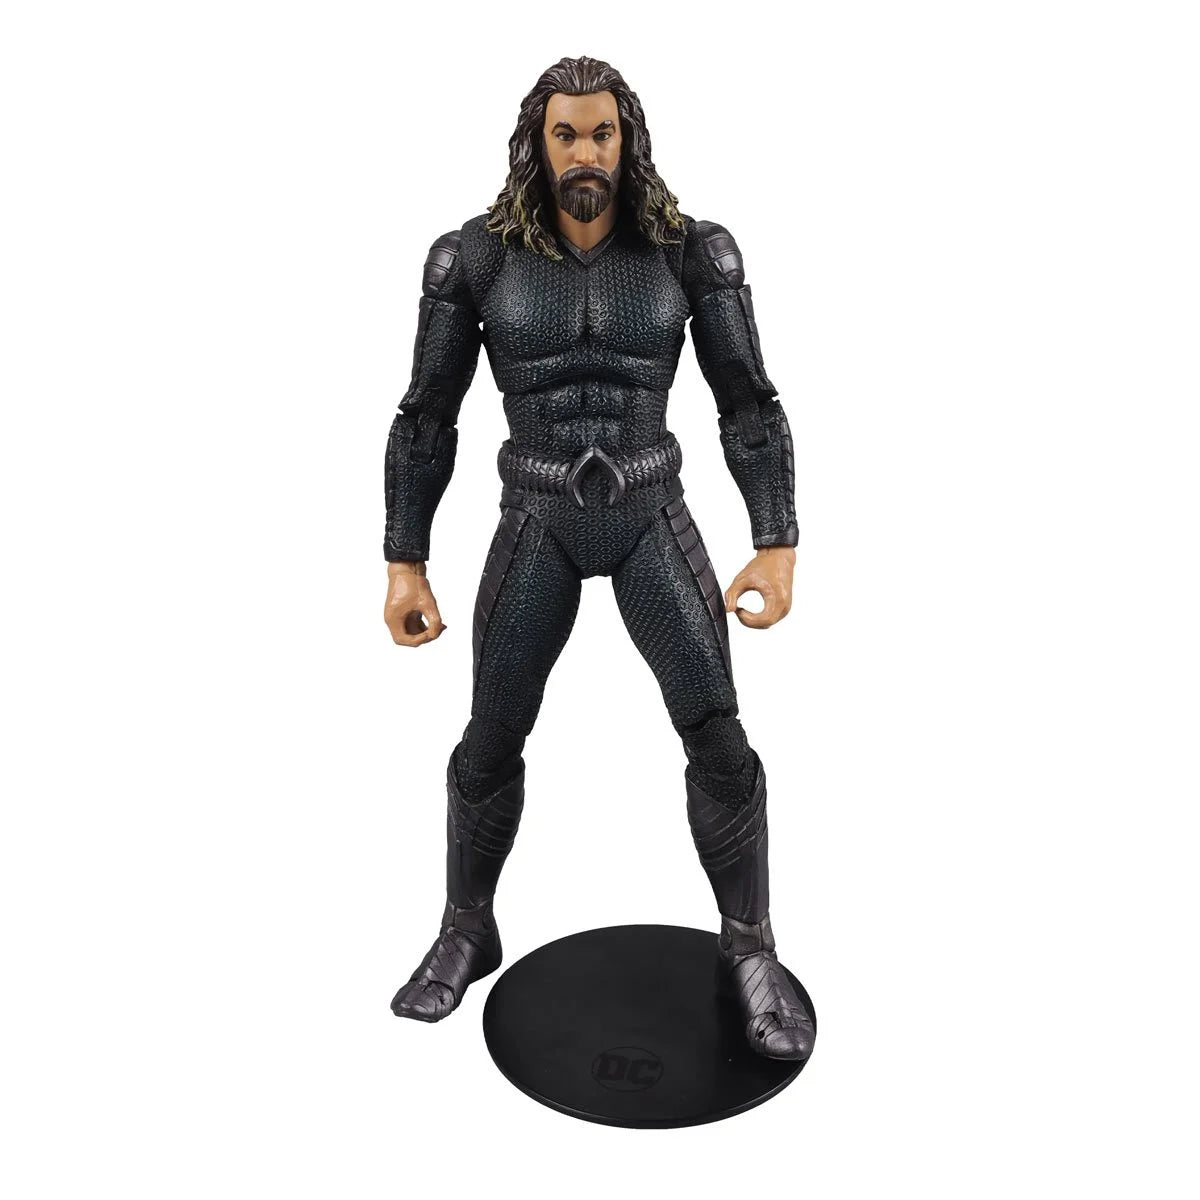 DC Multiverse Aquaman and the Lost Kingdom Movie Aquaman with Stealth Suit 7-Inch Scale Action Figure